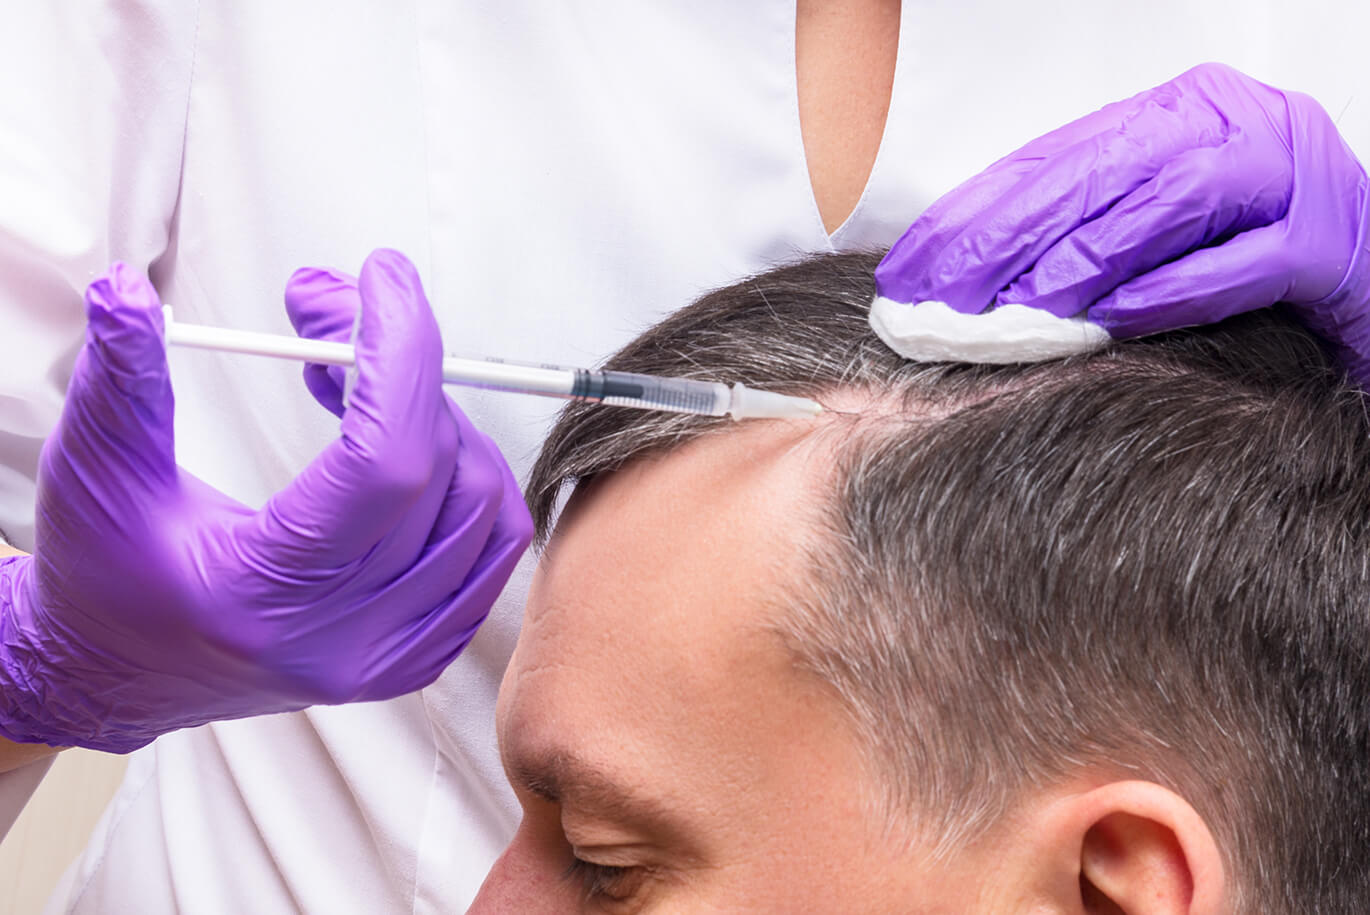 What is PRP for Hair Loss? PRP (Platelet Rich Plasma) Hair Treatment